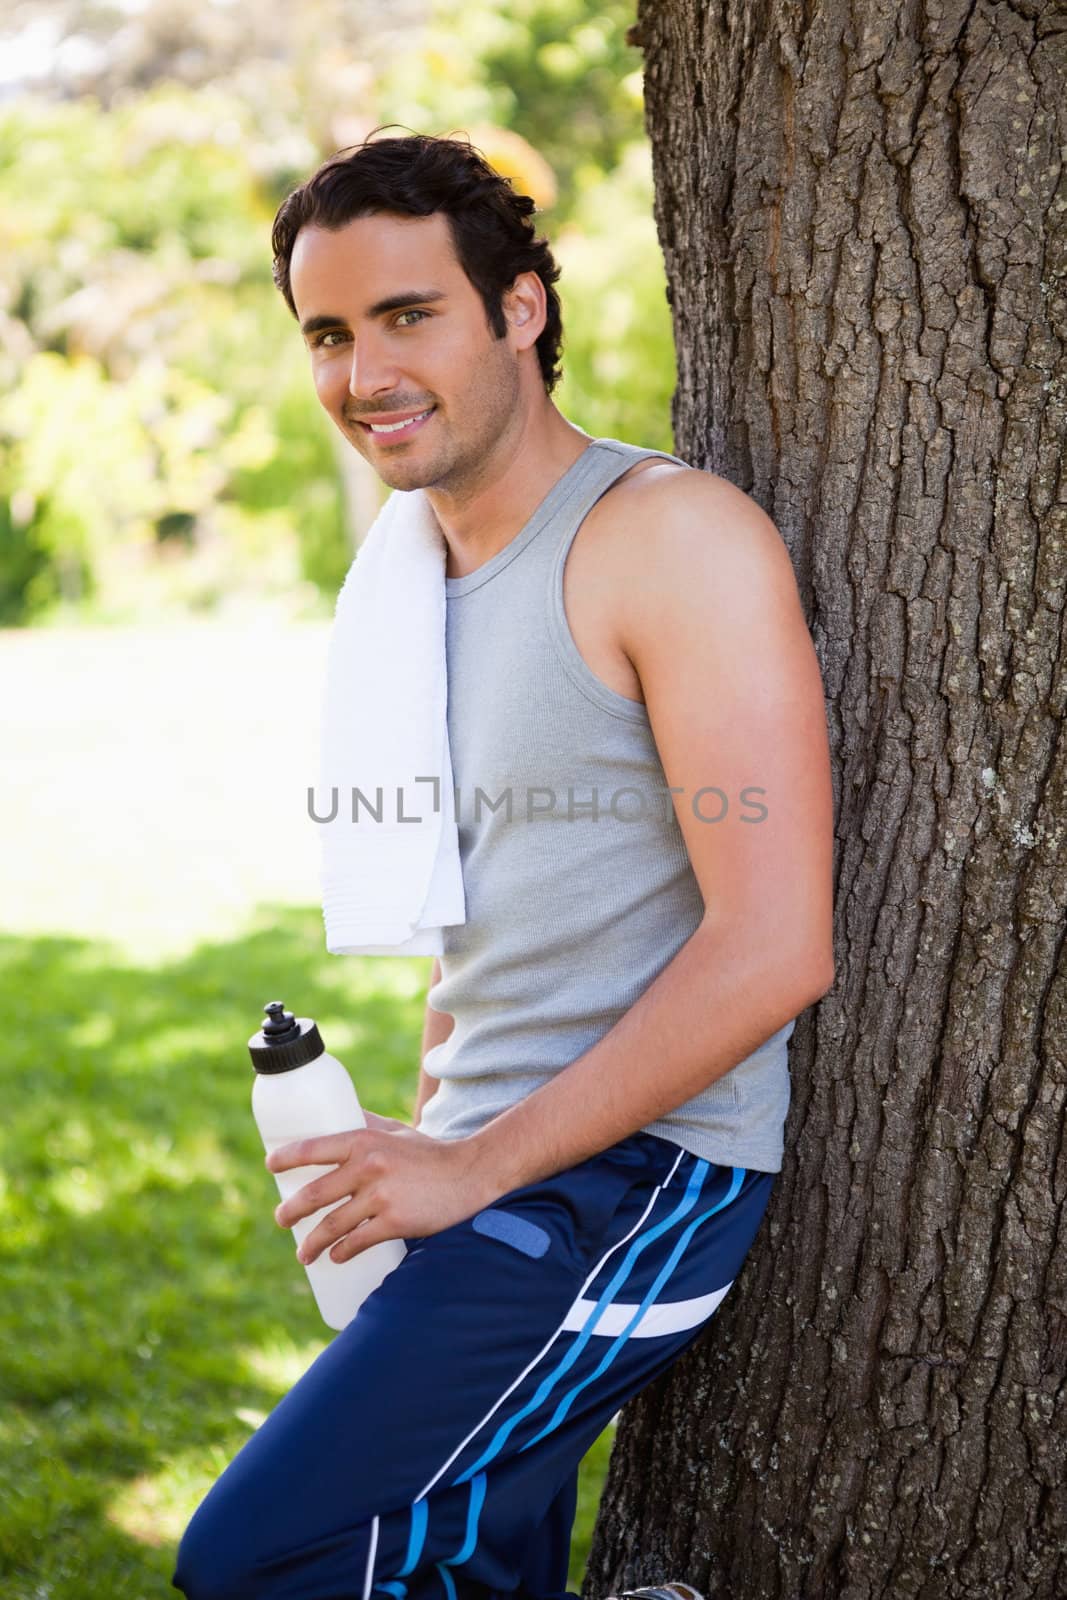 Smiling man with a towel on his shoulder looking towards side while holding a water bottle and resting against the trunk of a tree